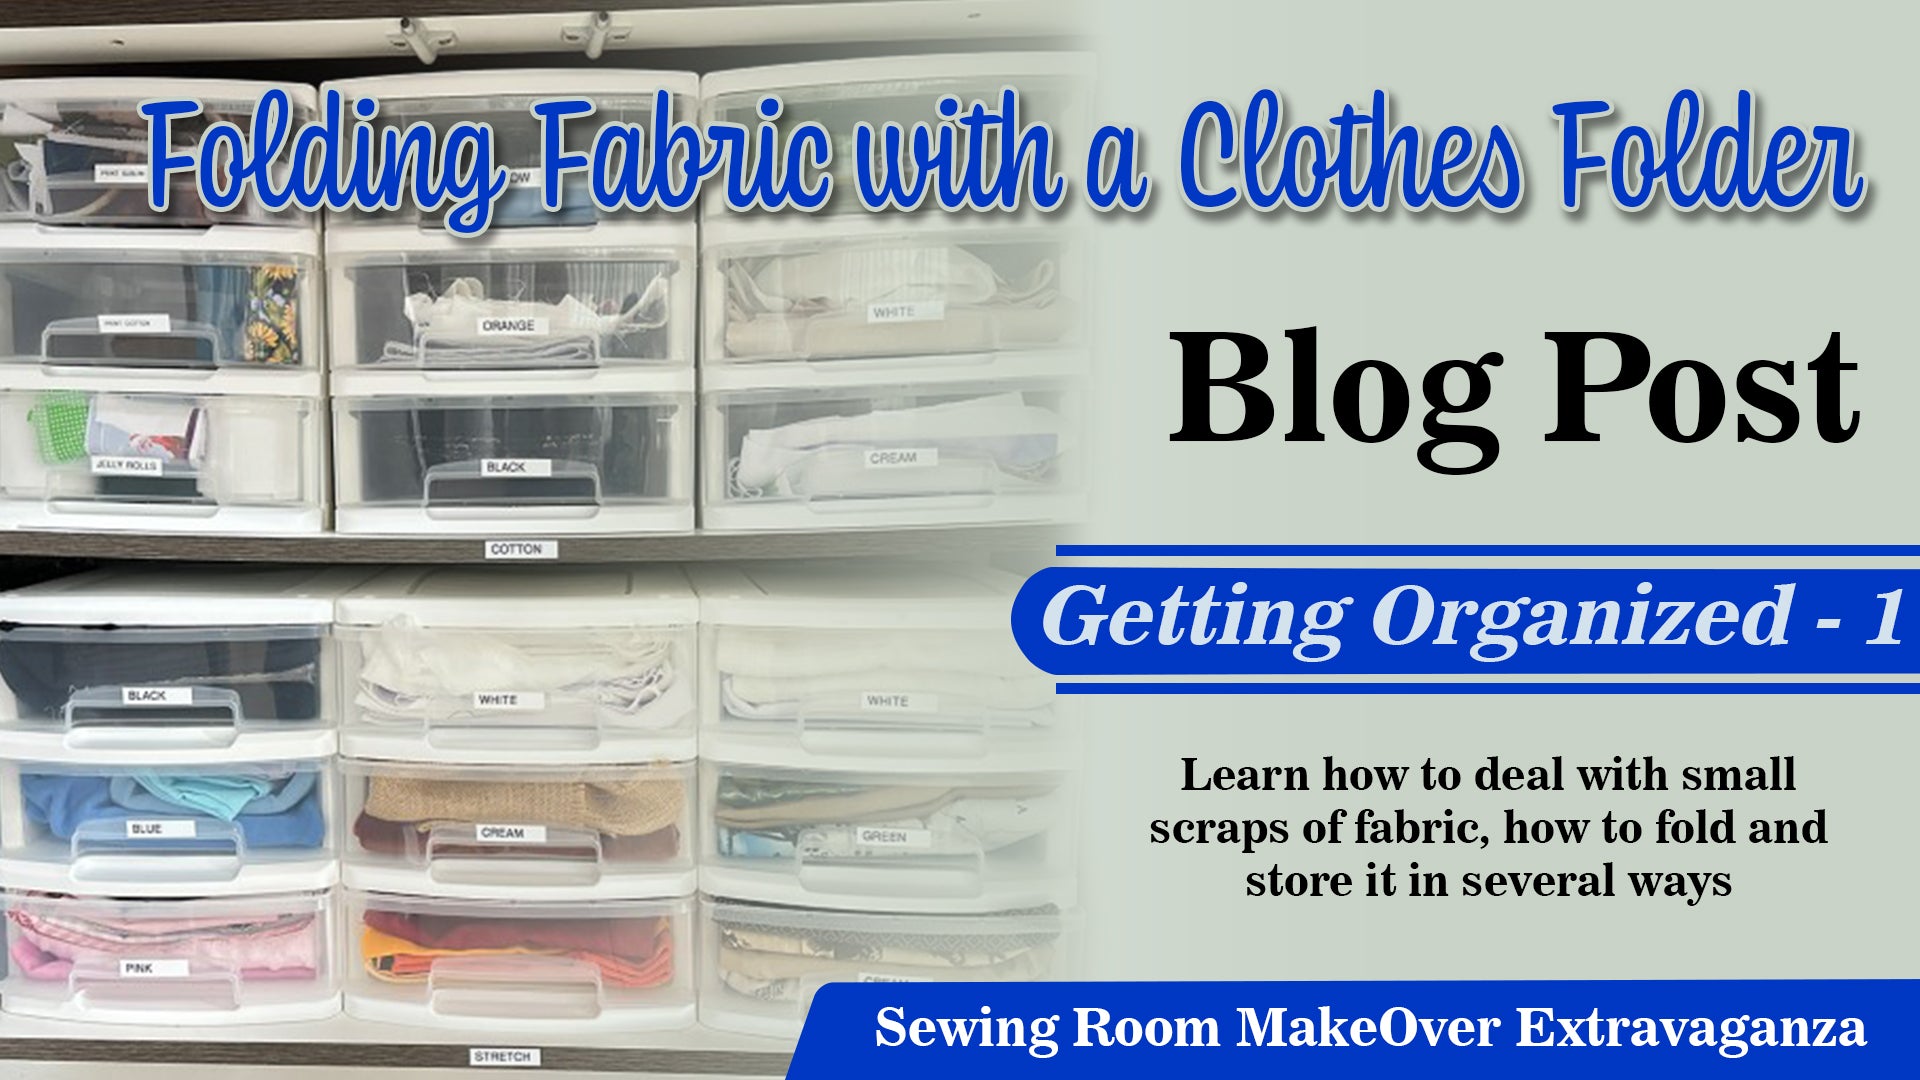 How To Fold And Store Fabric